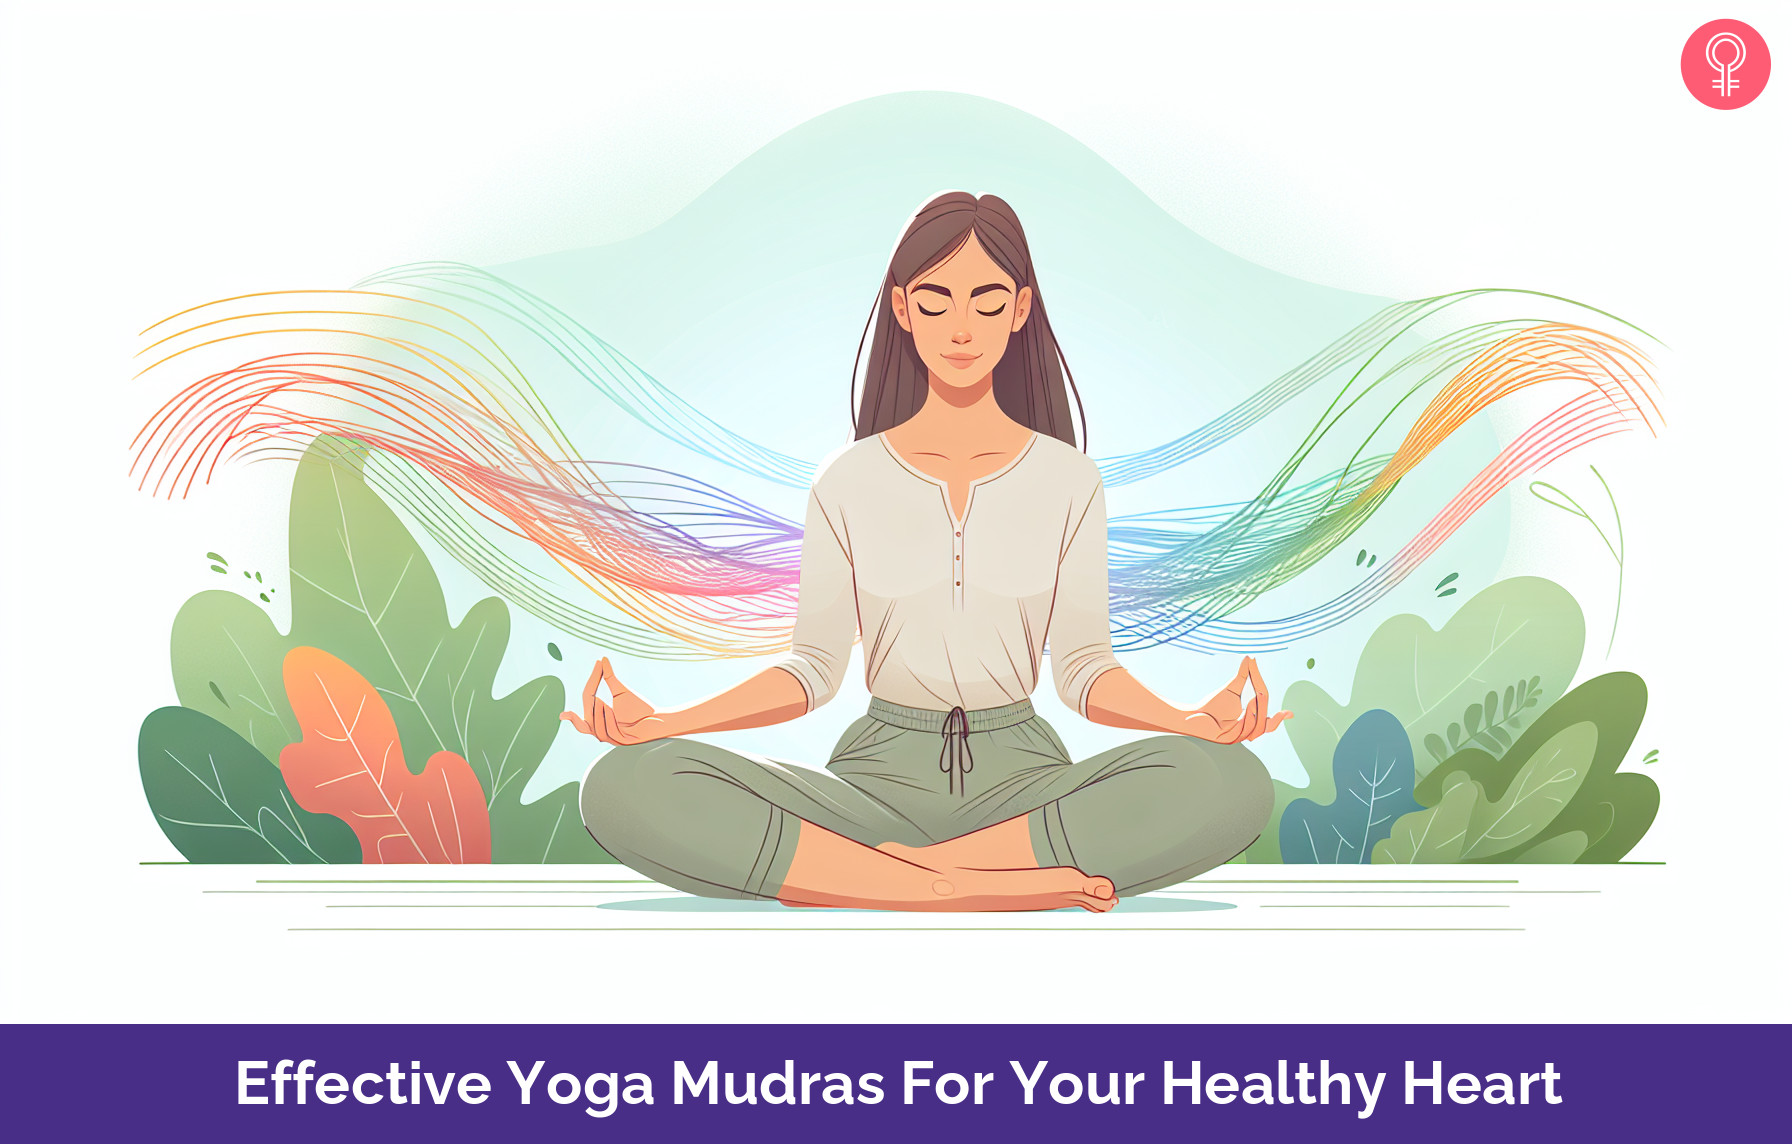 Yoga Mudras For Your Healthy Heart